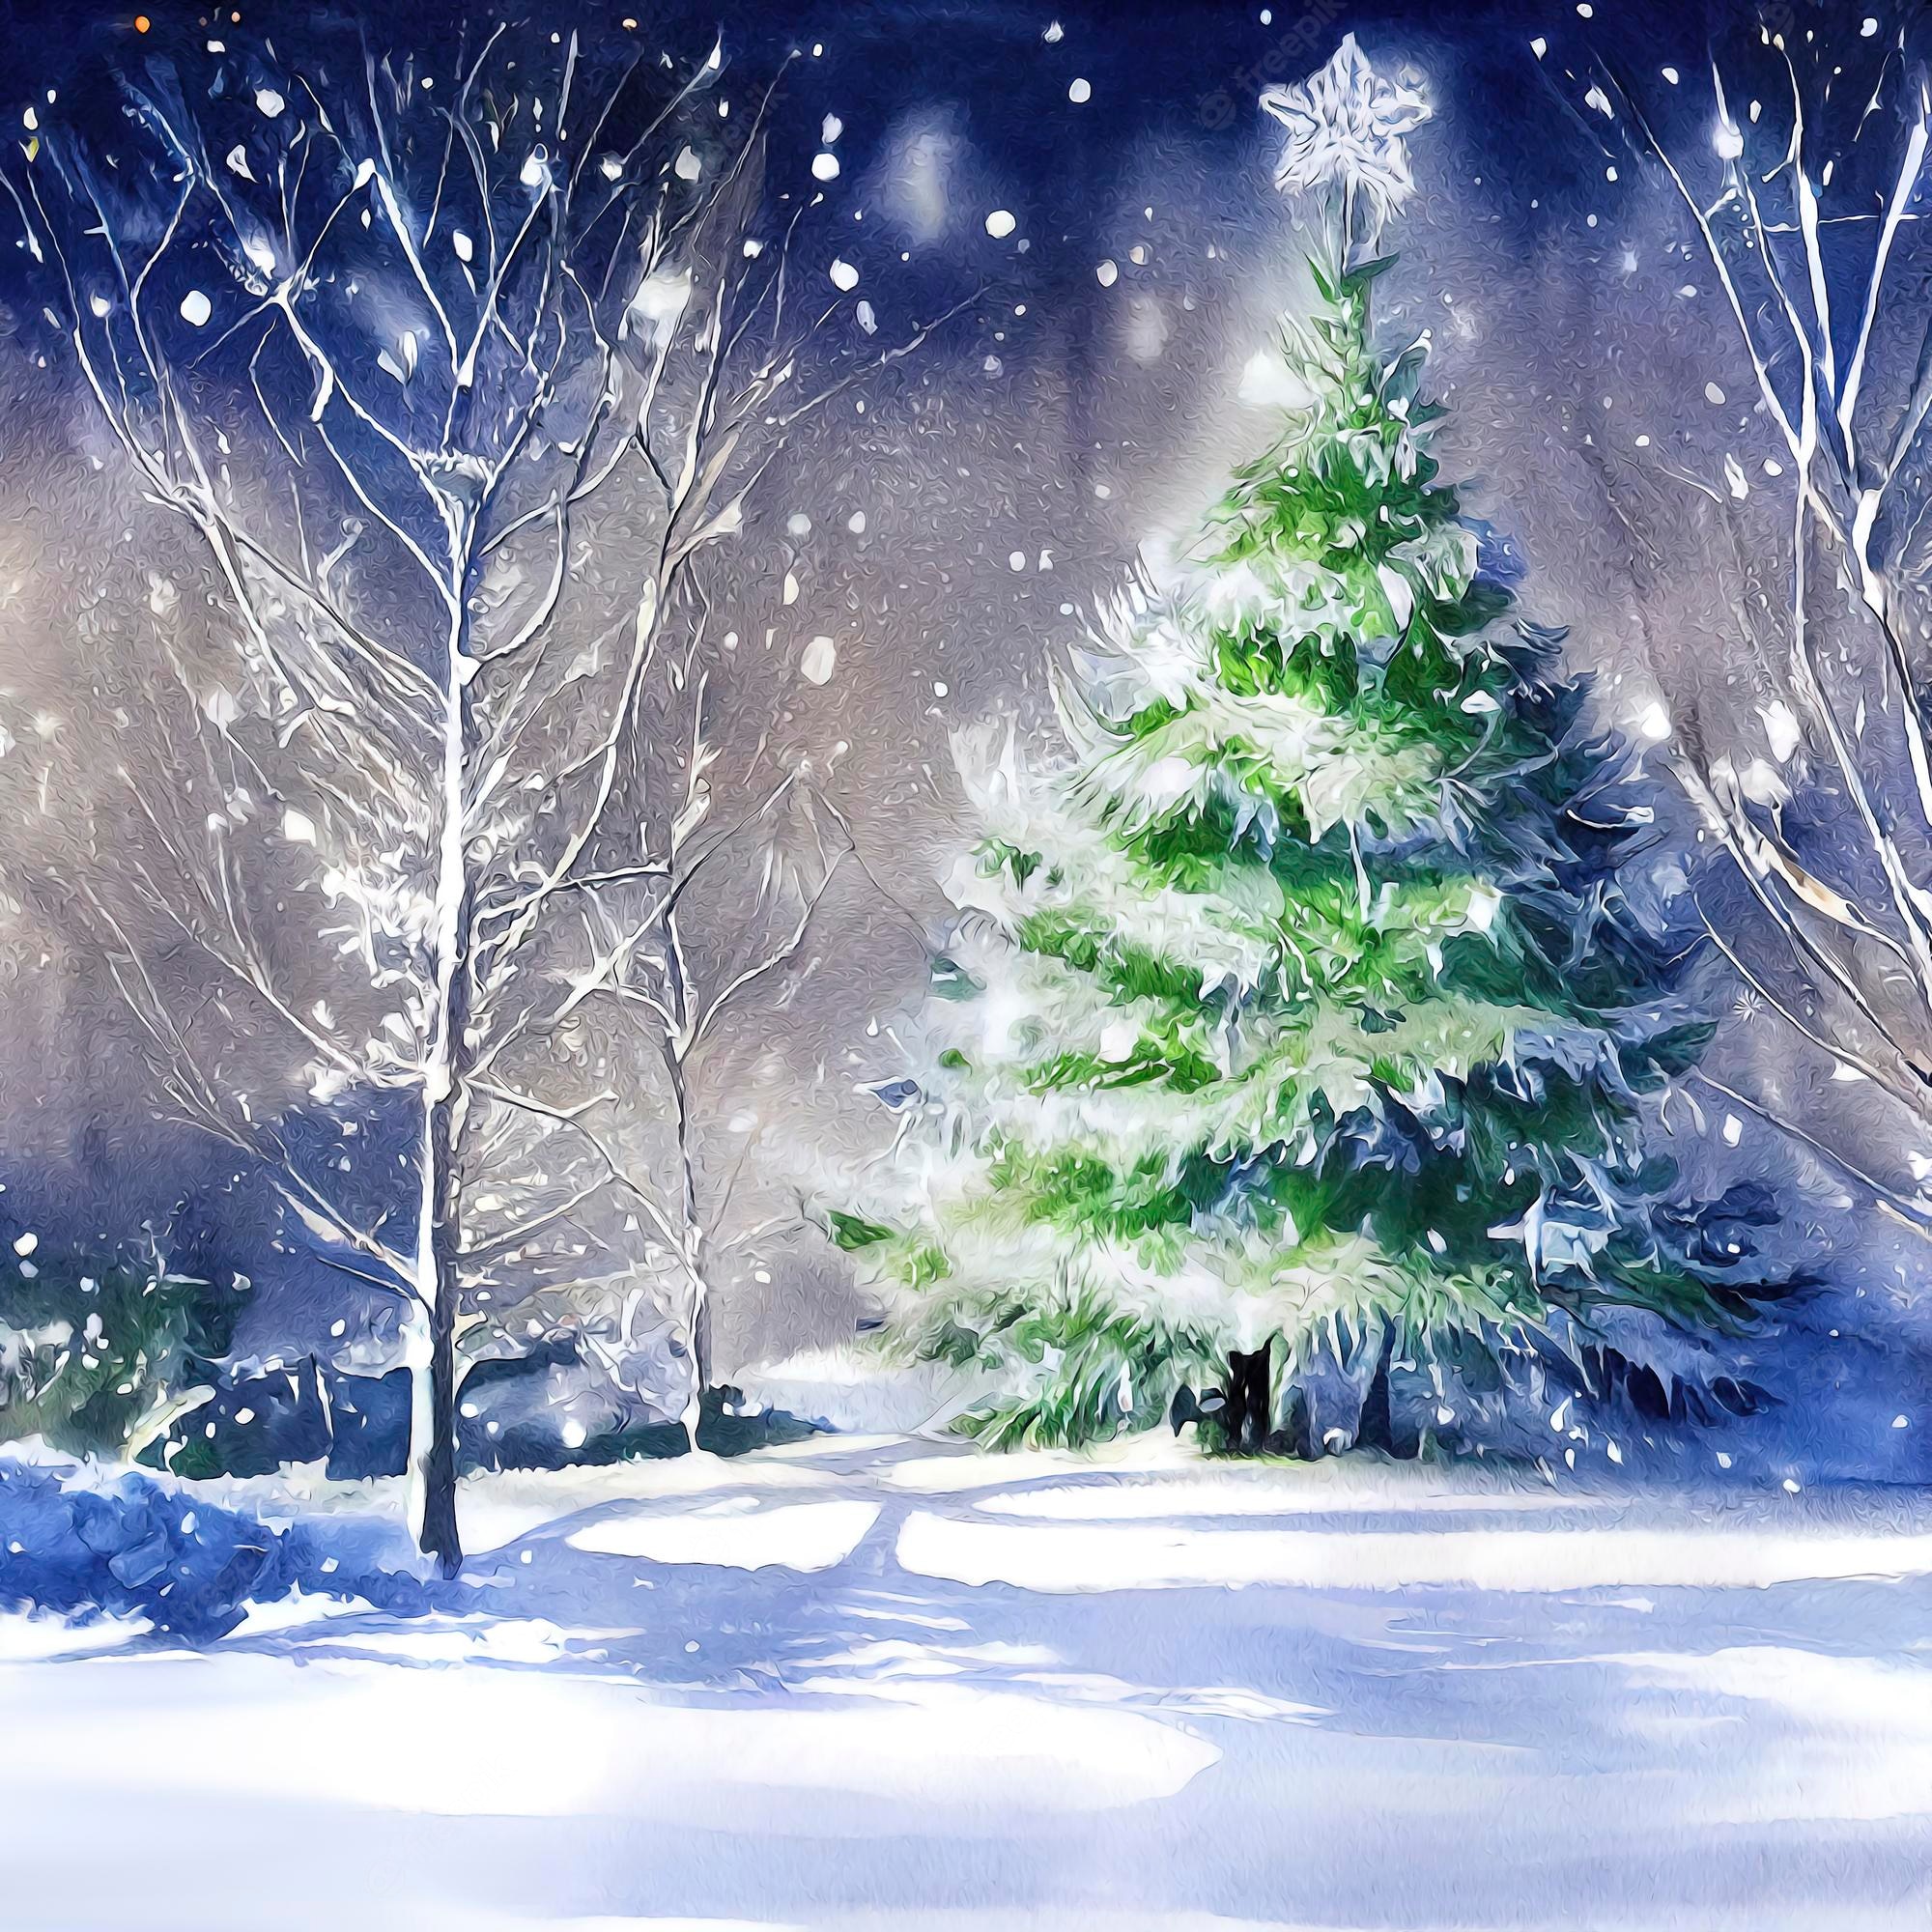 Premium Photo. Christmas landscape wallpaper beautiful winter scenery with christmas trees and snow